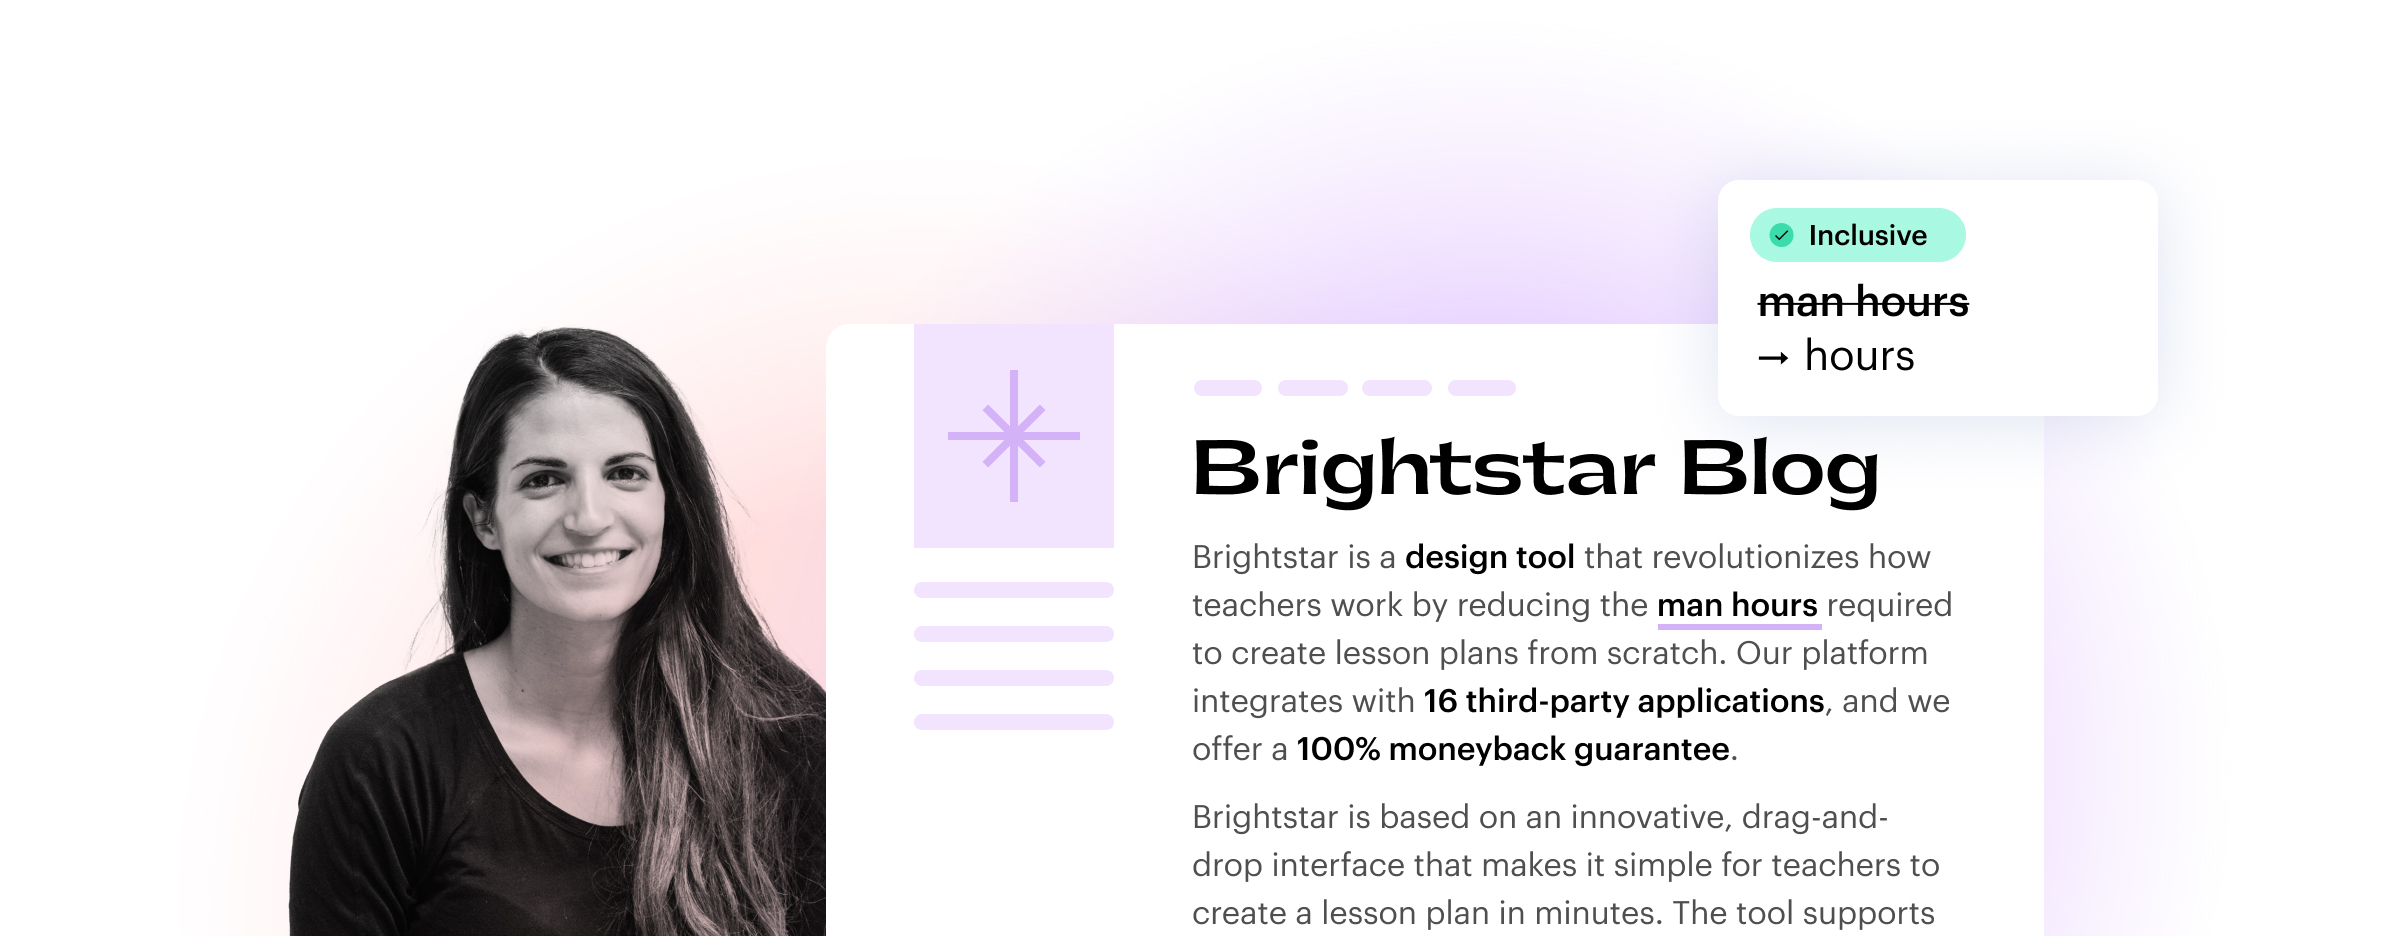 Brightstar Blog

Brightstar is a design tool that revolutionizes how teachers work by reducing the man hours required to create lesson plans from scratch. Our platform integrates with 16 third-party applications, and we offer a 100% moneyback guarantee.

Brightstar is based on an innovative, drag-and-drop interface that makes it simple for teachers to create a lesson plan in minutes. The tool supports...